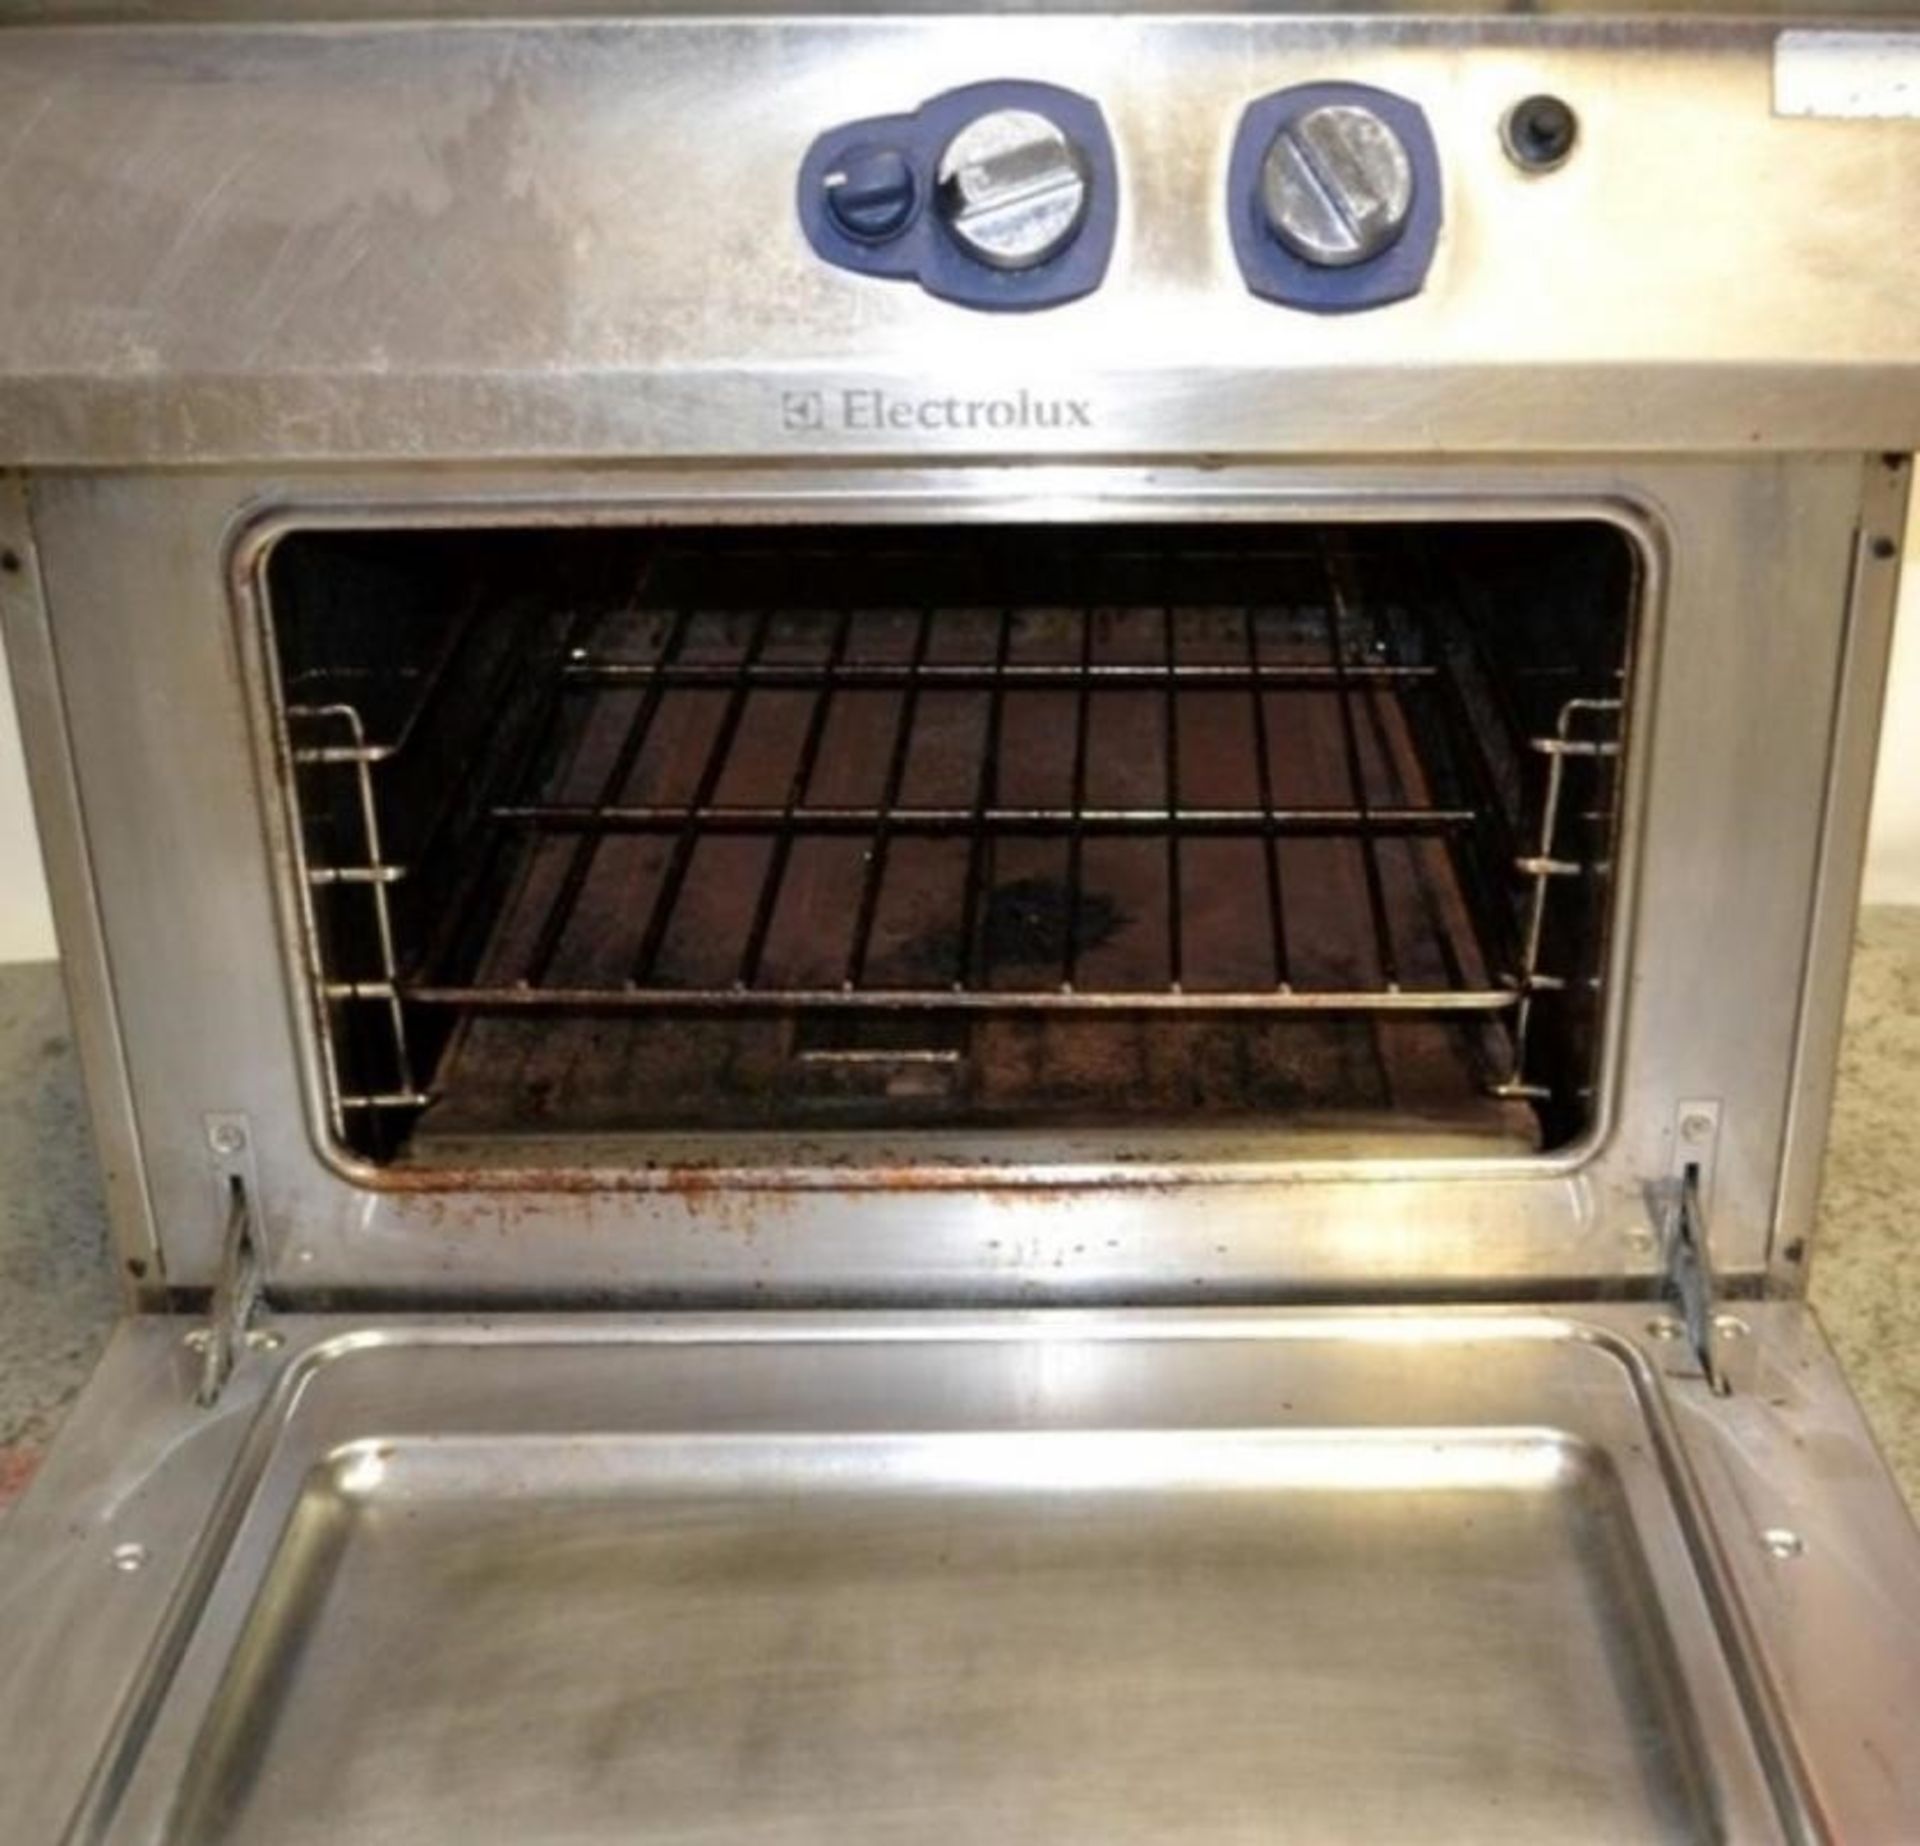 1 x Electrolux Commercial Stainless Steel Solid Top Oven With a Durable Cast-iron Cooking Surface - - Image 6 of 8